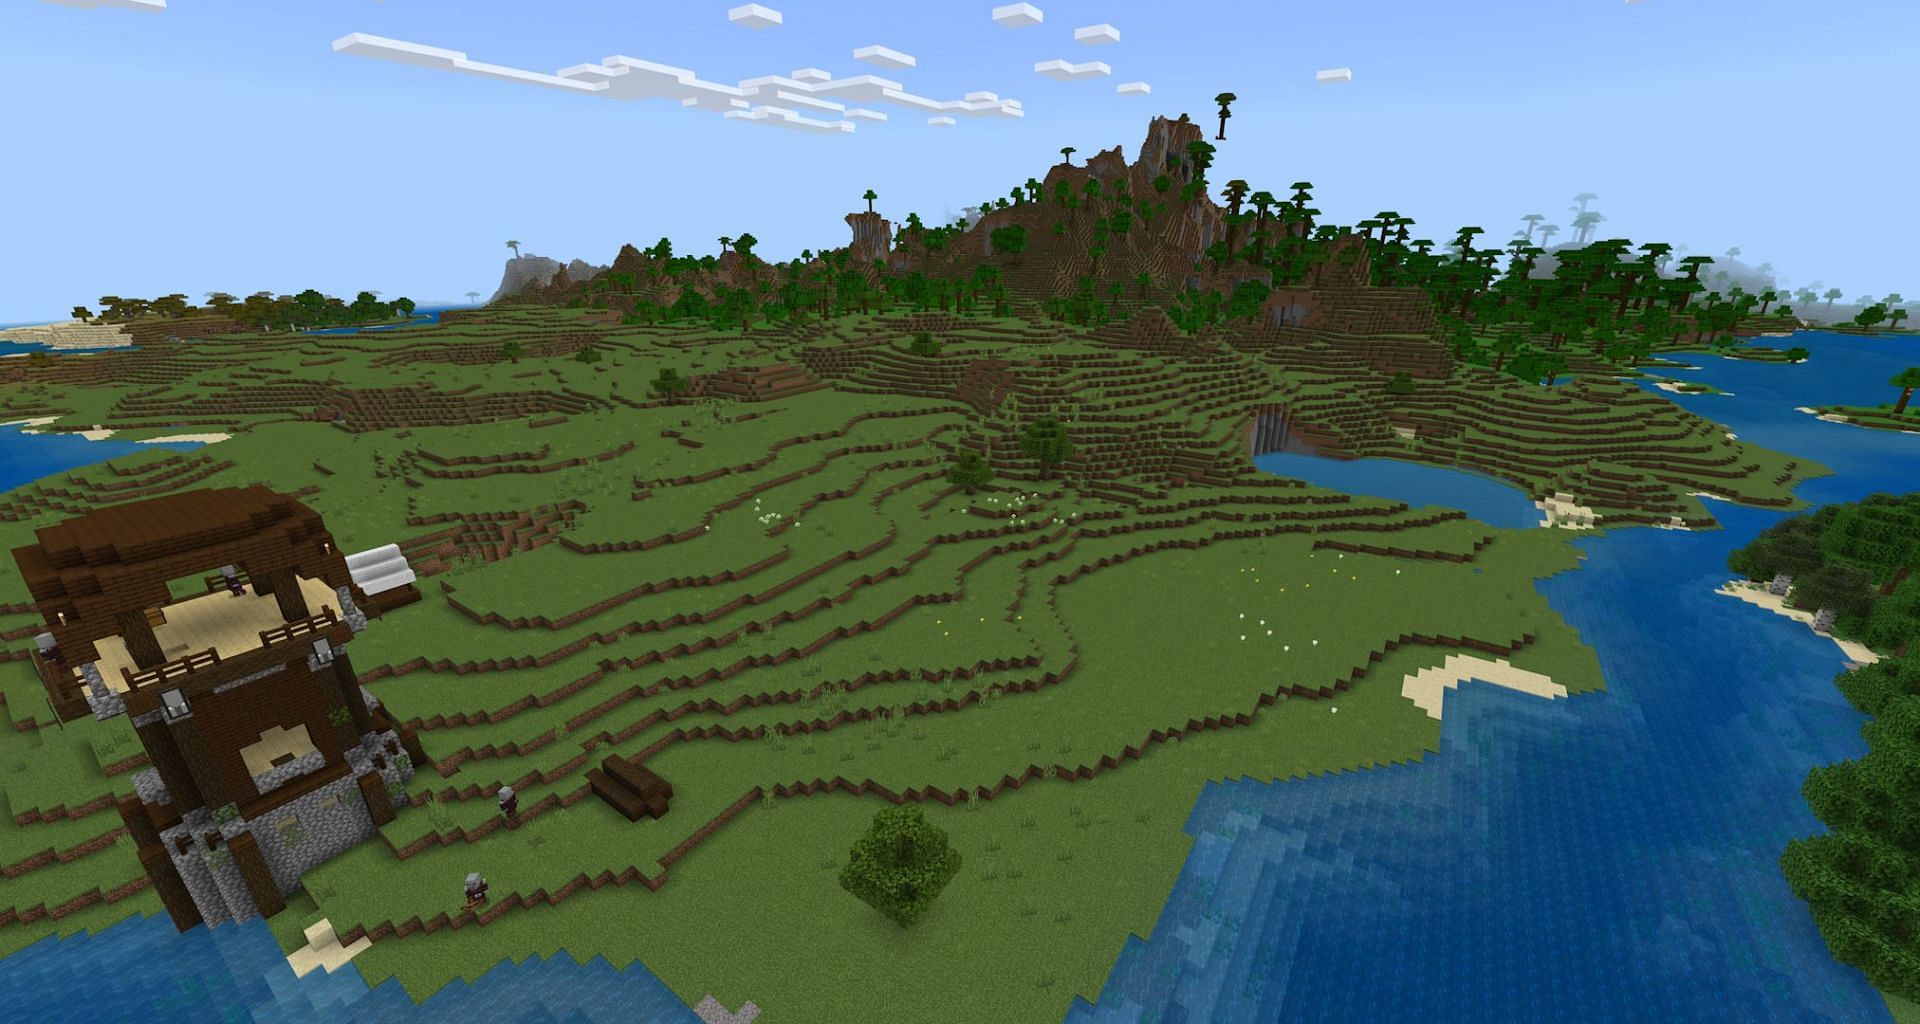 The pillager outpost near spawn, with spawn jungle in the background (Image via Mojang)